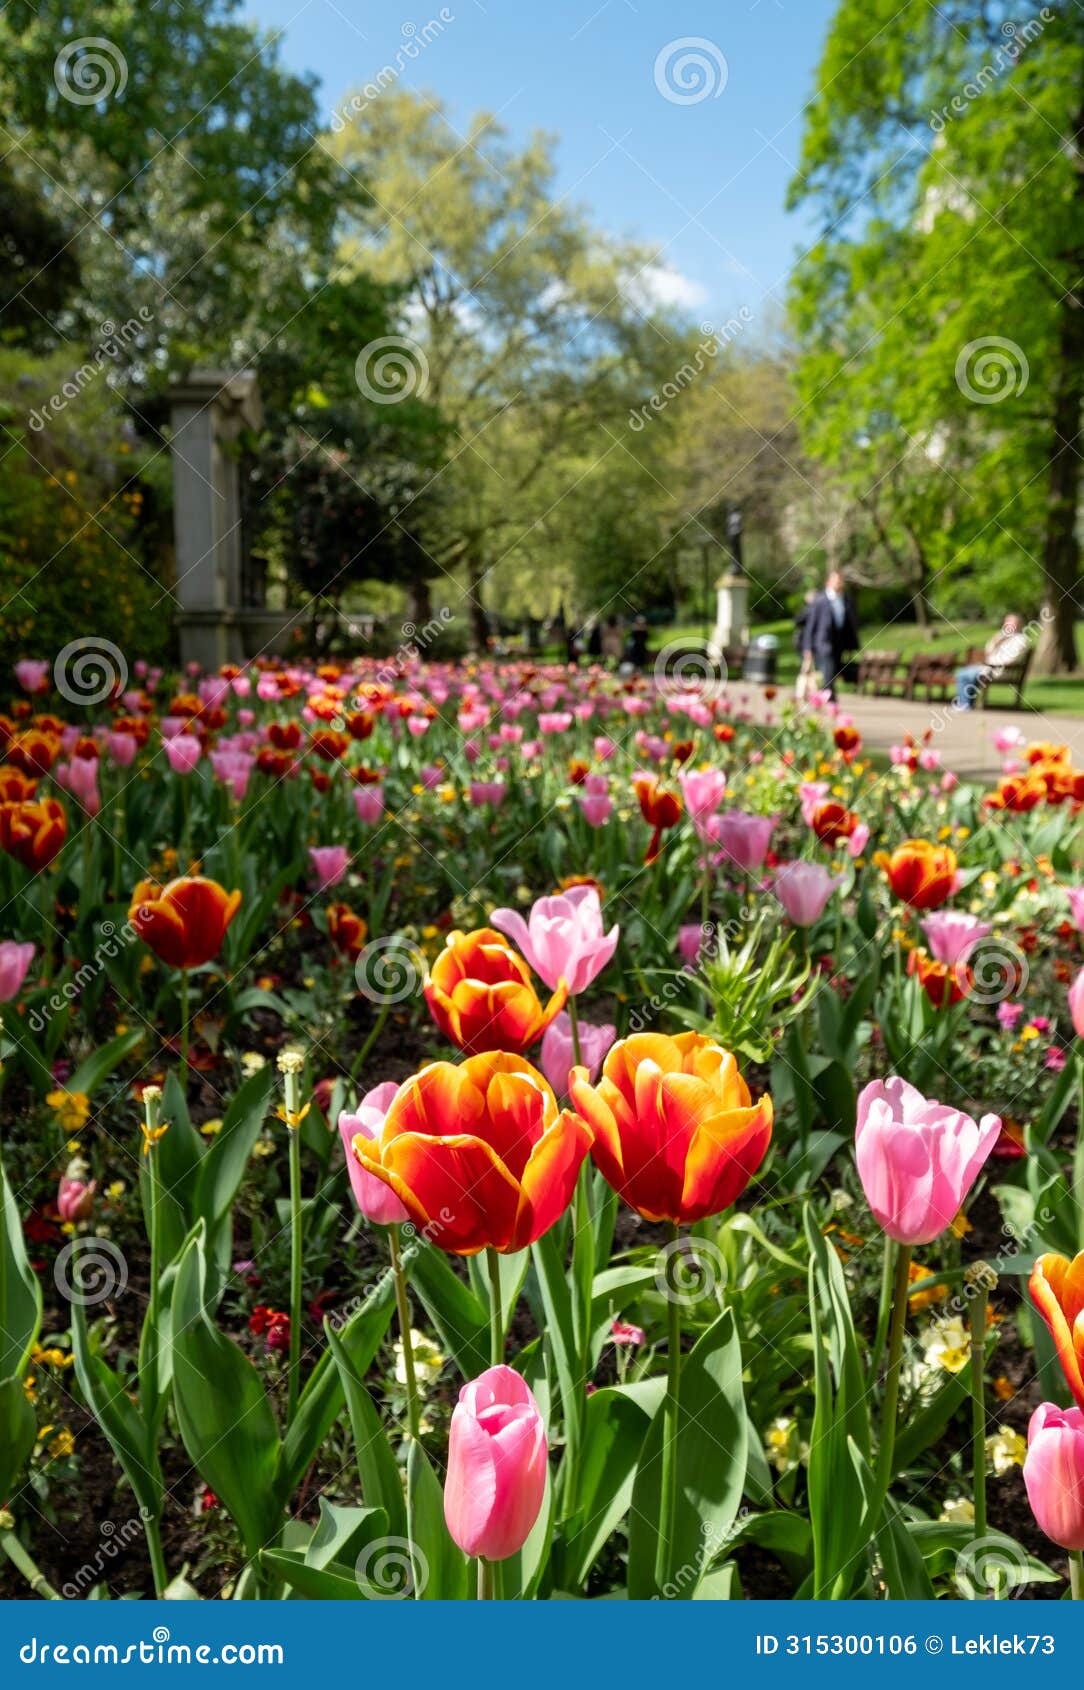 colourful tulips, photographed in springtime at victoria embankment gardens on the bank of the river thames in central london, uk.